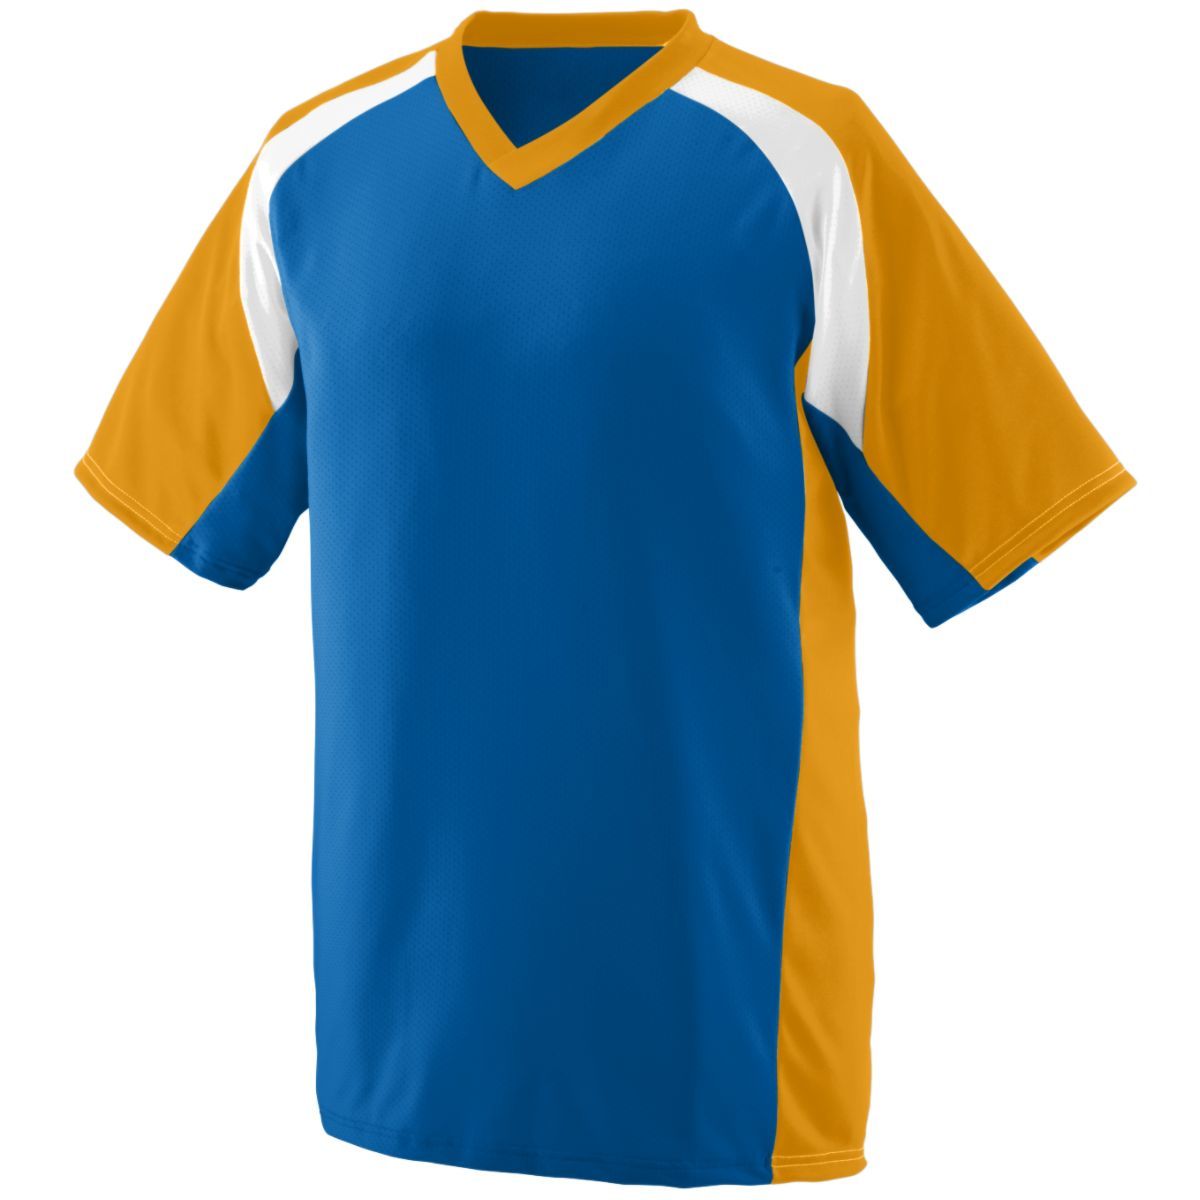 Augusta Sportswear Youth Nitro Jersey in Royal/Gold/White  -Part of the Youth, Youth-Jersey, Augusta-Products, Football, Shirts, All-Sports, All-Sports-1 product lines at KanaleyCreations.com